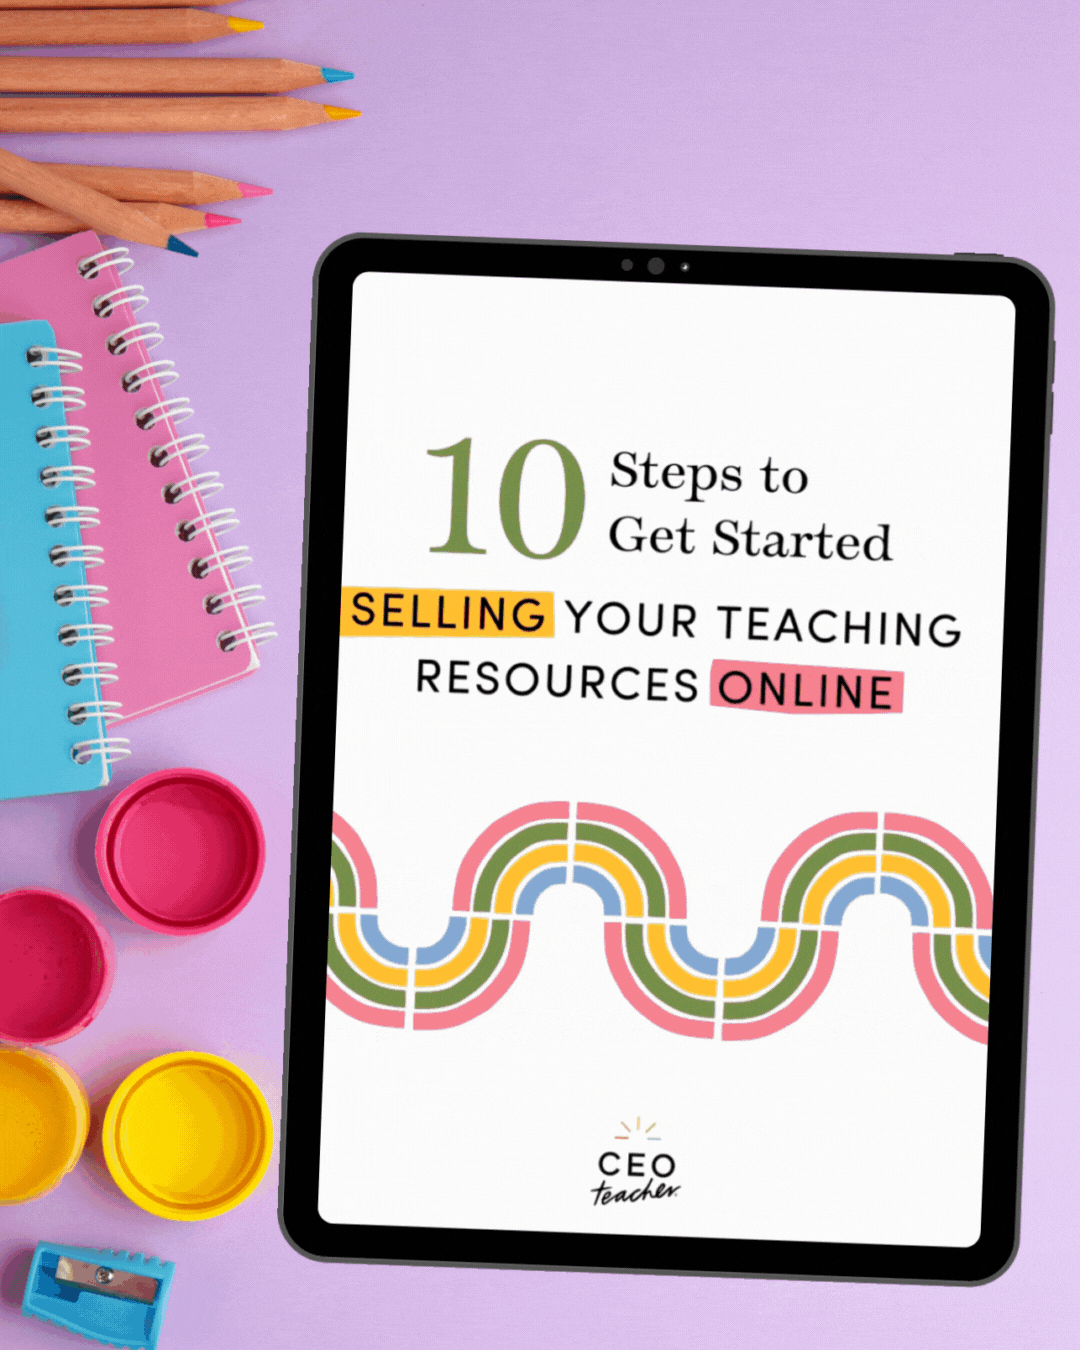 Learn How To Make Teachers Pay Teachers Products In 5 Actionable Steps